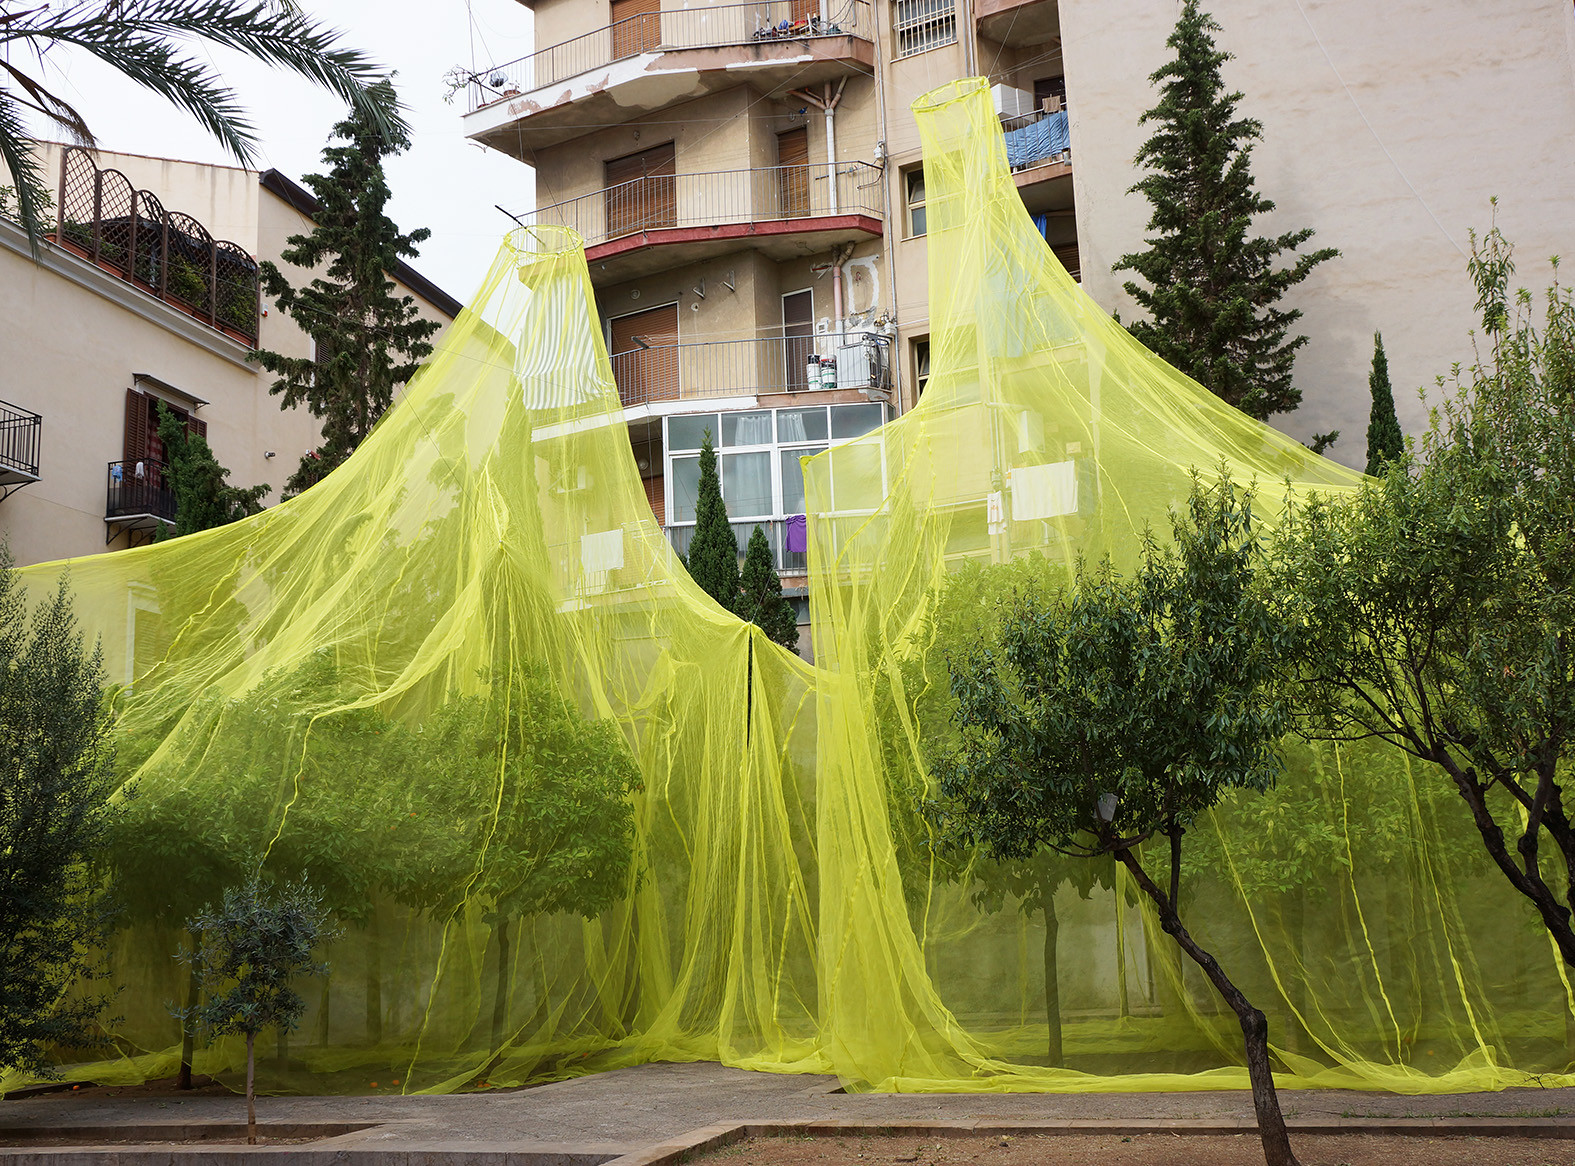 Lime green plastic netting is hung from an apartment building with several stories and balconies. The netting covers some tress while two uncovered trees stand in front of it.